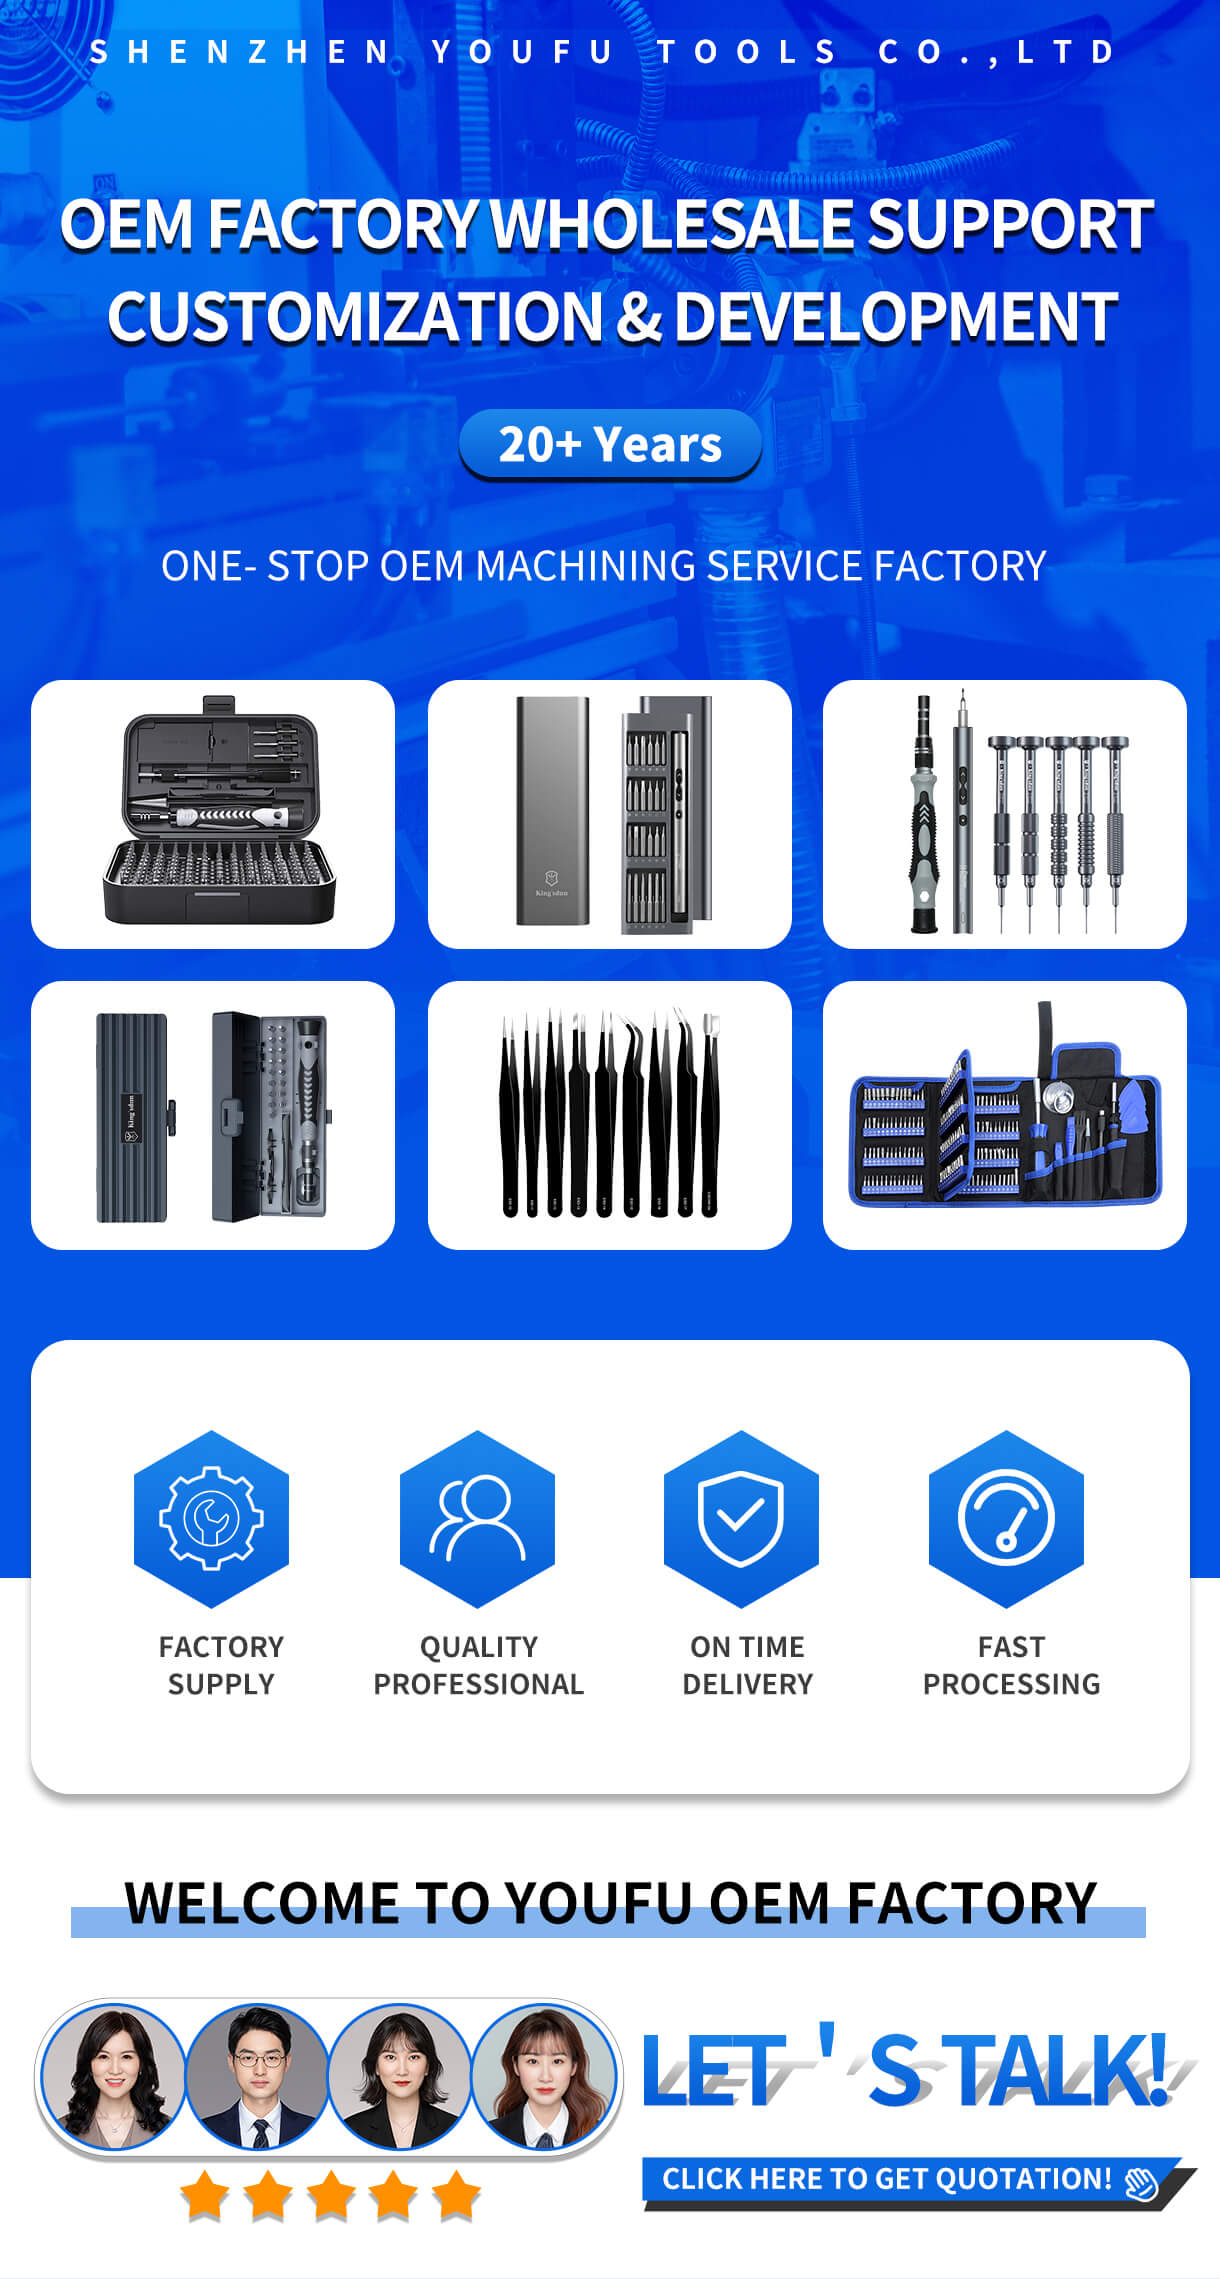 Multi-tool kit with 98 interchangeable magnetic bit and 41 tools for various jobs. Screw sizes range from Tiny P2, PH000, T2, SL1.0 bit to large P8, PH2.0, T20, SL4.0 bit. It is the perfect repair kit compatible with mobile phones, iPhone, watch, glasses, cameras, iPad, tablets, laptops, PC, TV, and other electronic devices.